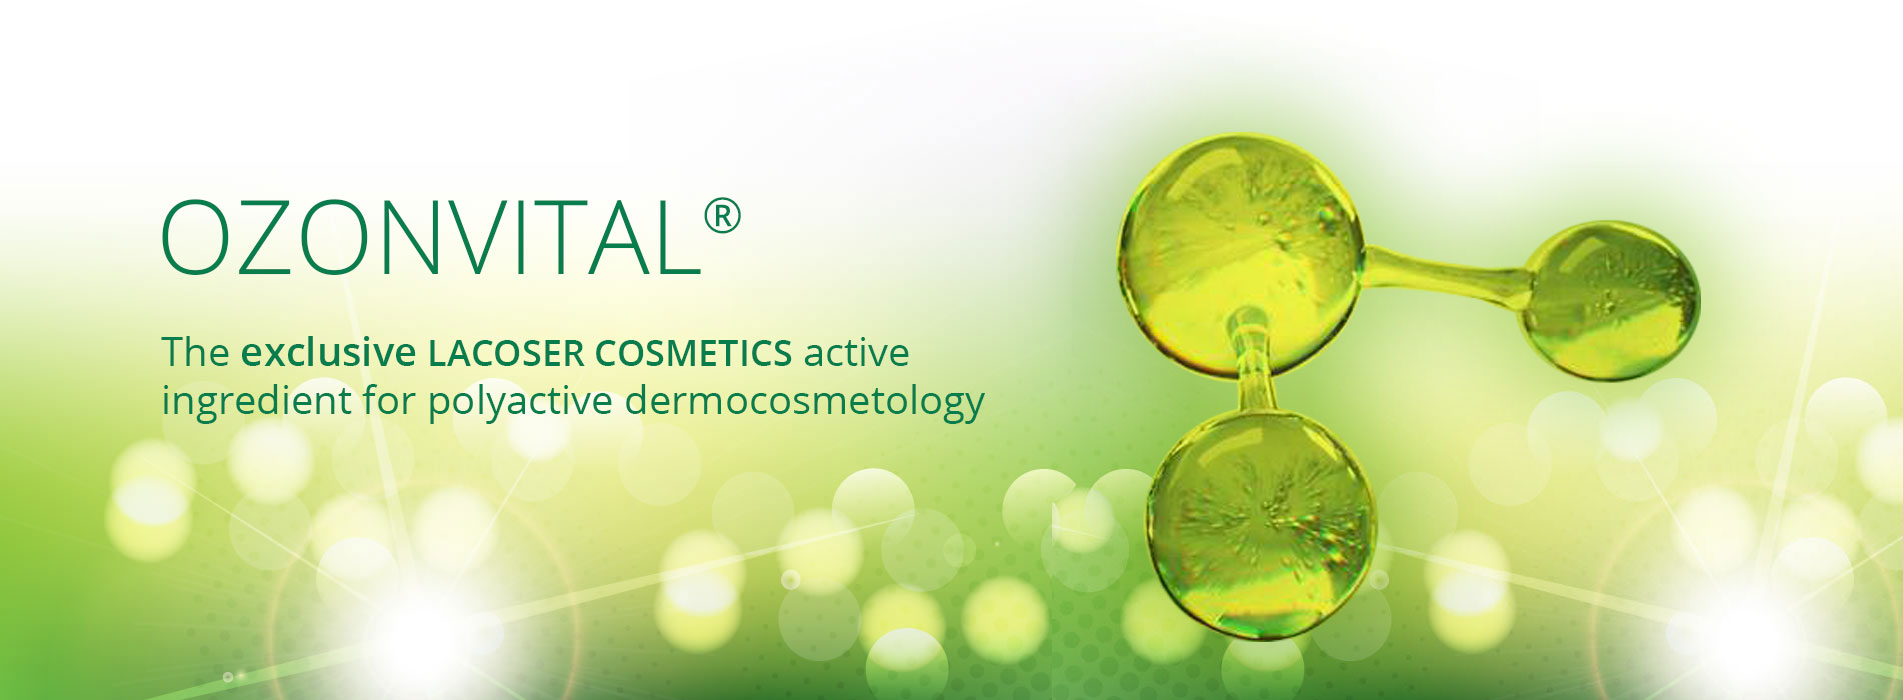 OZONVITAL® - The exclusive LACOSER COSMETICS active ingredient for polyactive dermocosmetology